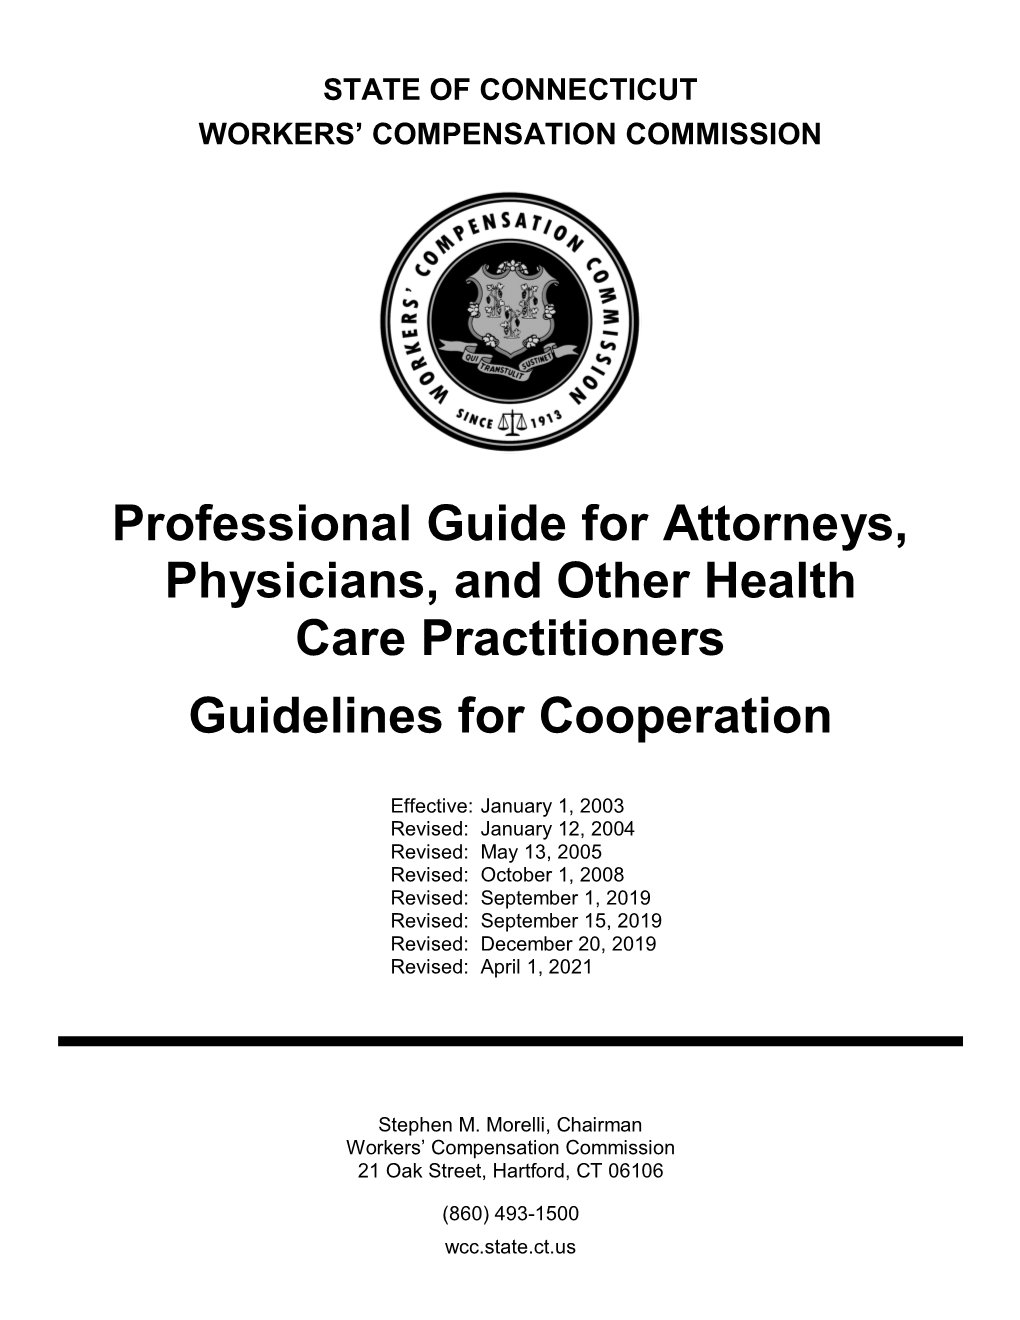 Professional Guide for Attorneys, Physicians, and Other Health Care Practitioners Guidelines for Cooperation